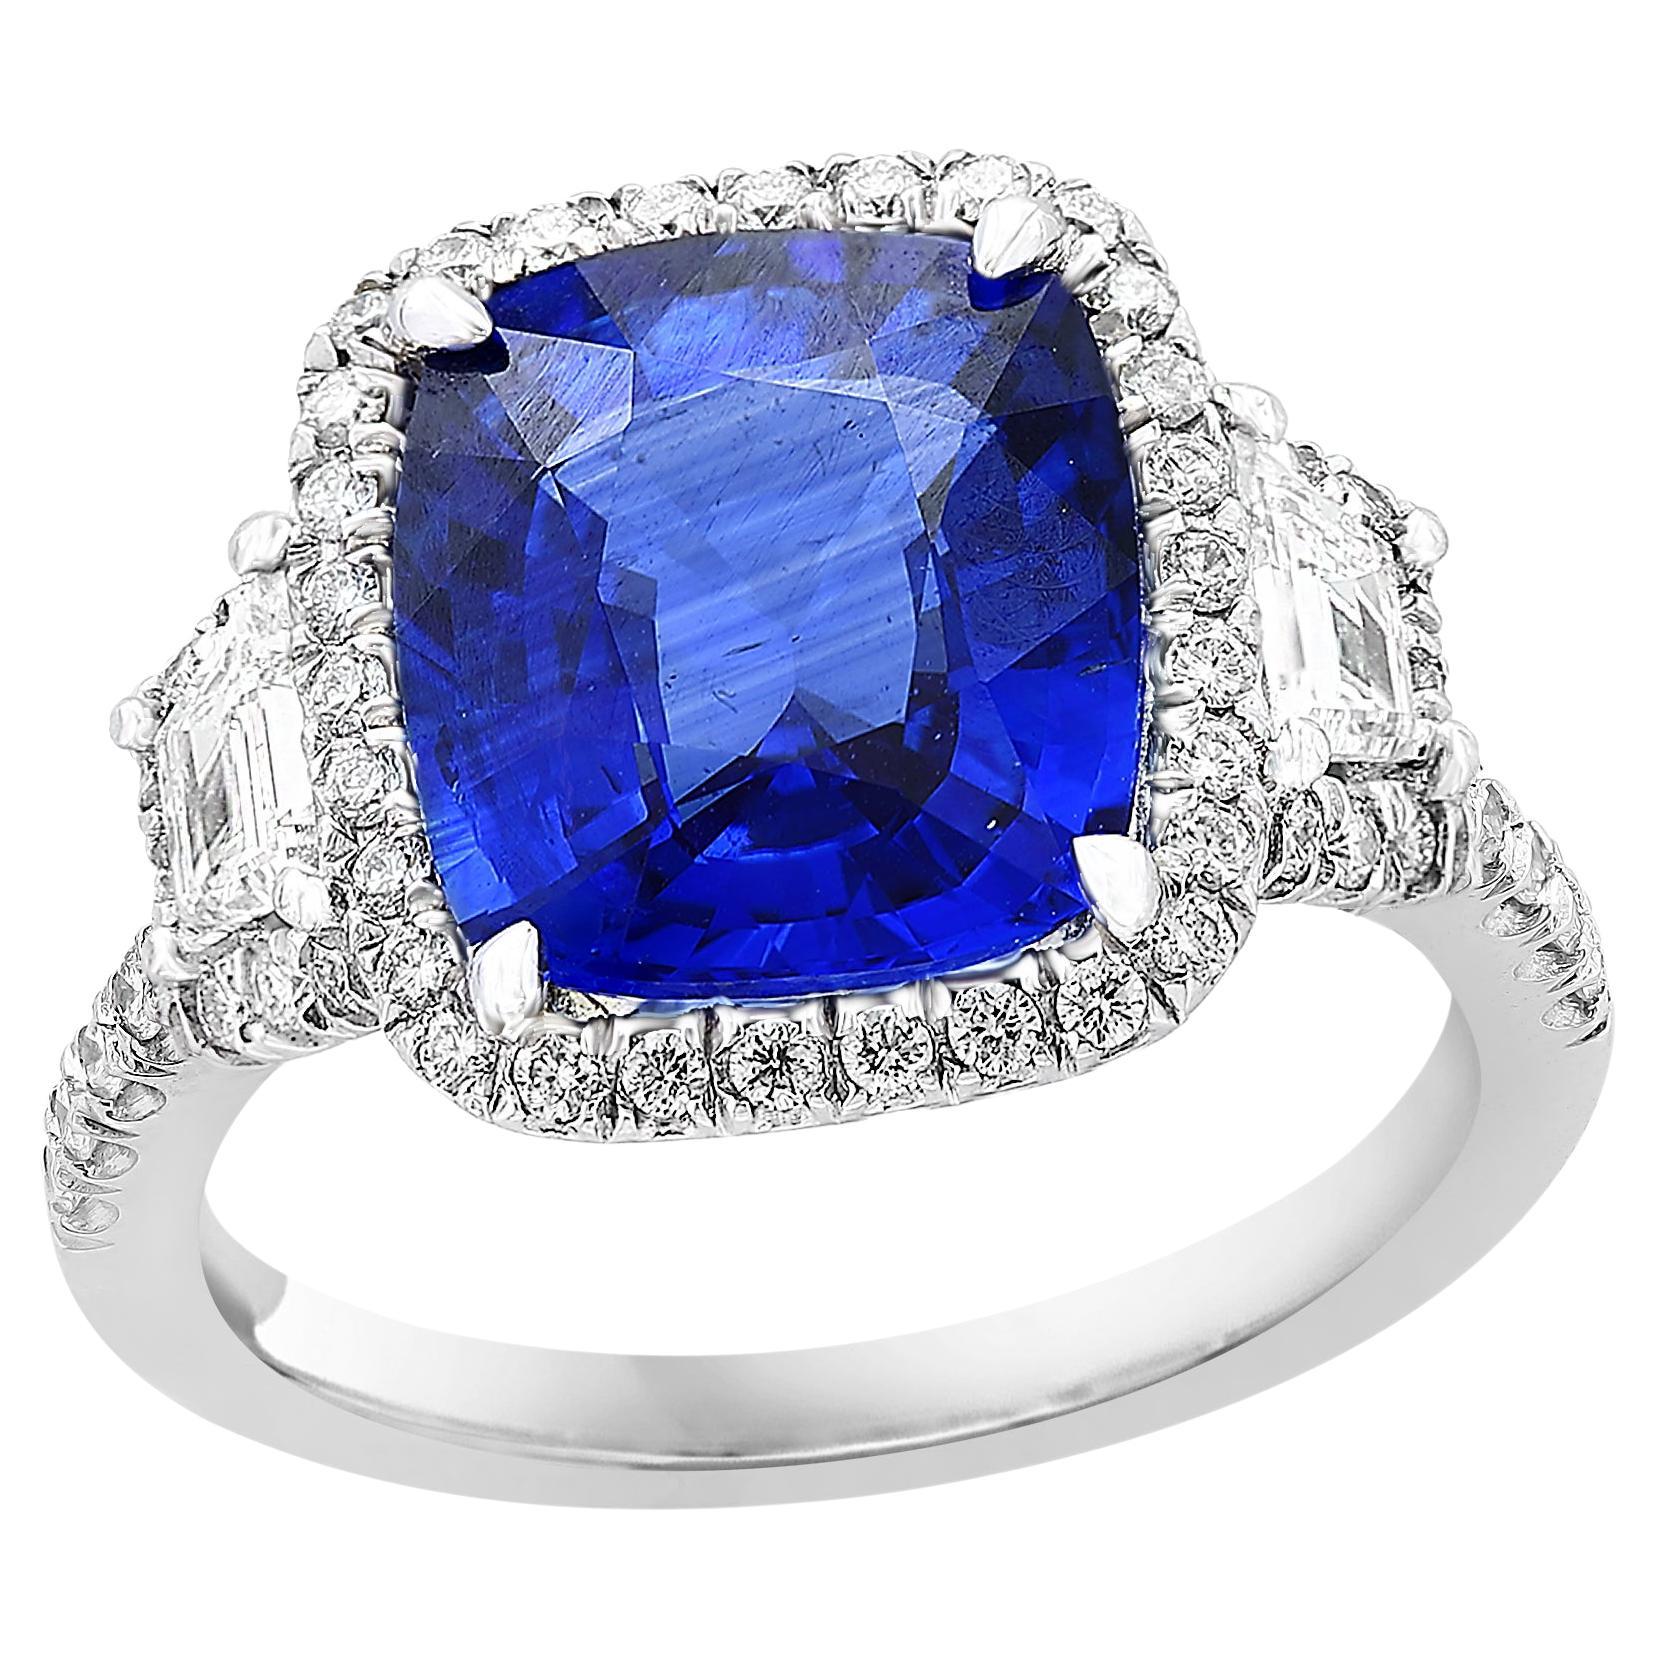 Certified 5.76 Carat Cushion Cut Sapphire Diamond 3 Stone Ring in Platinum For Sale